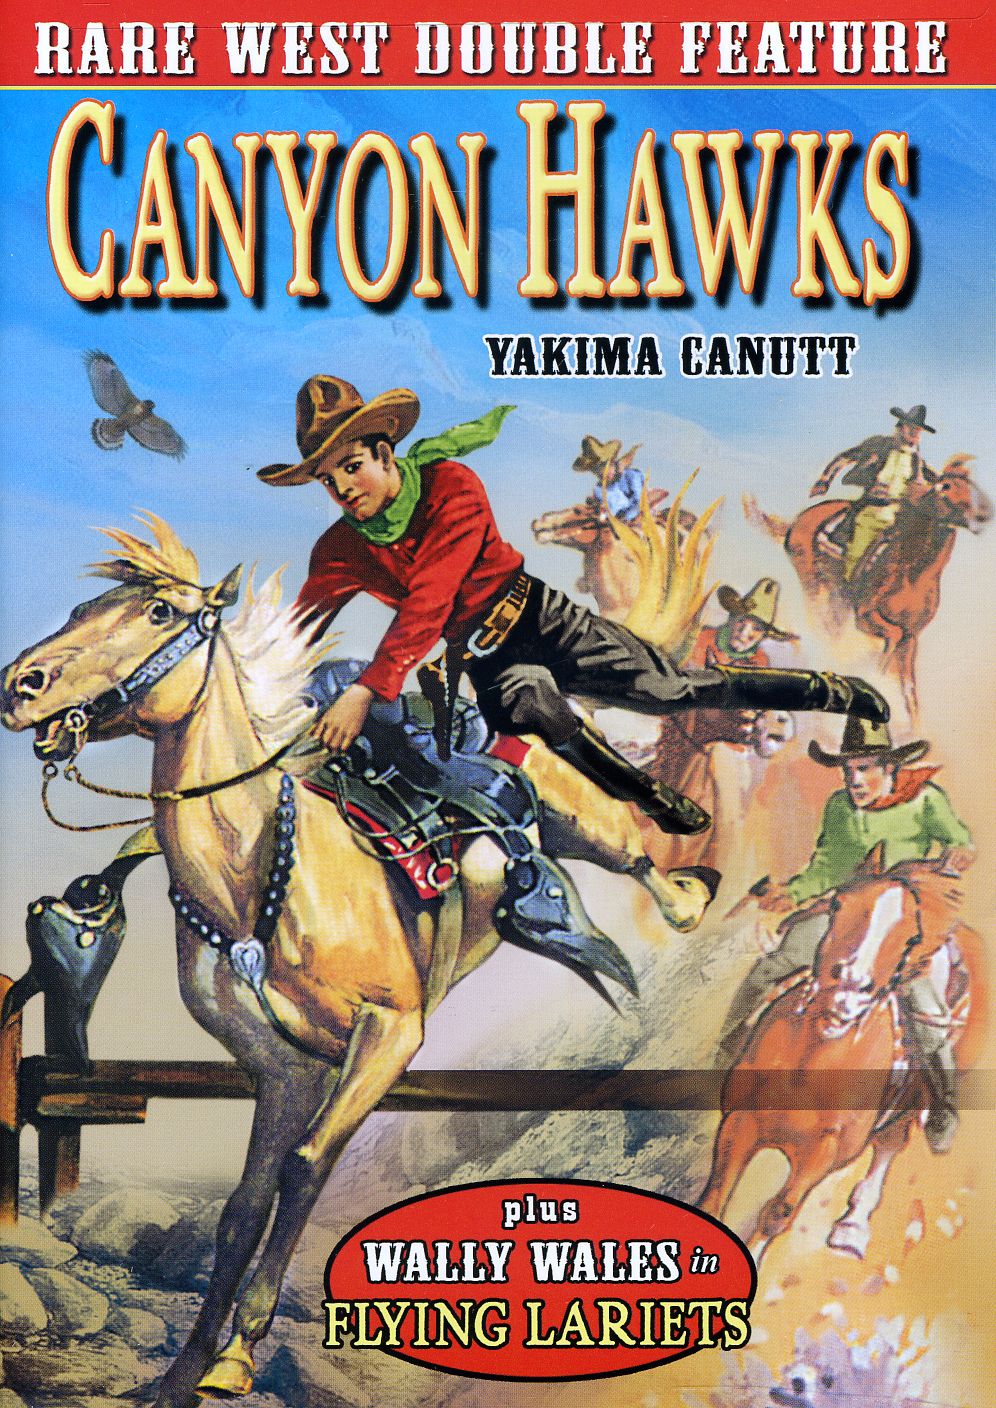 RARE WESTERN DOUBLE FEATURE: CANYON HAWKS & FLYING